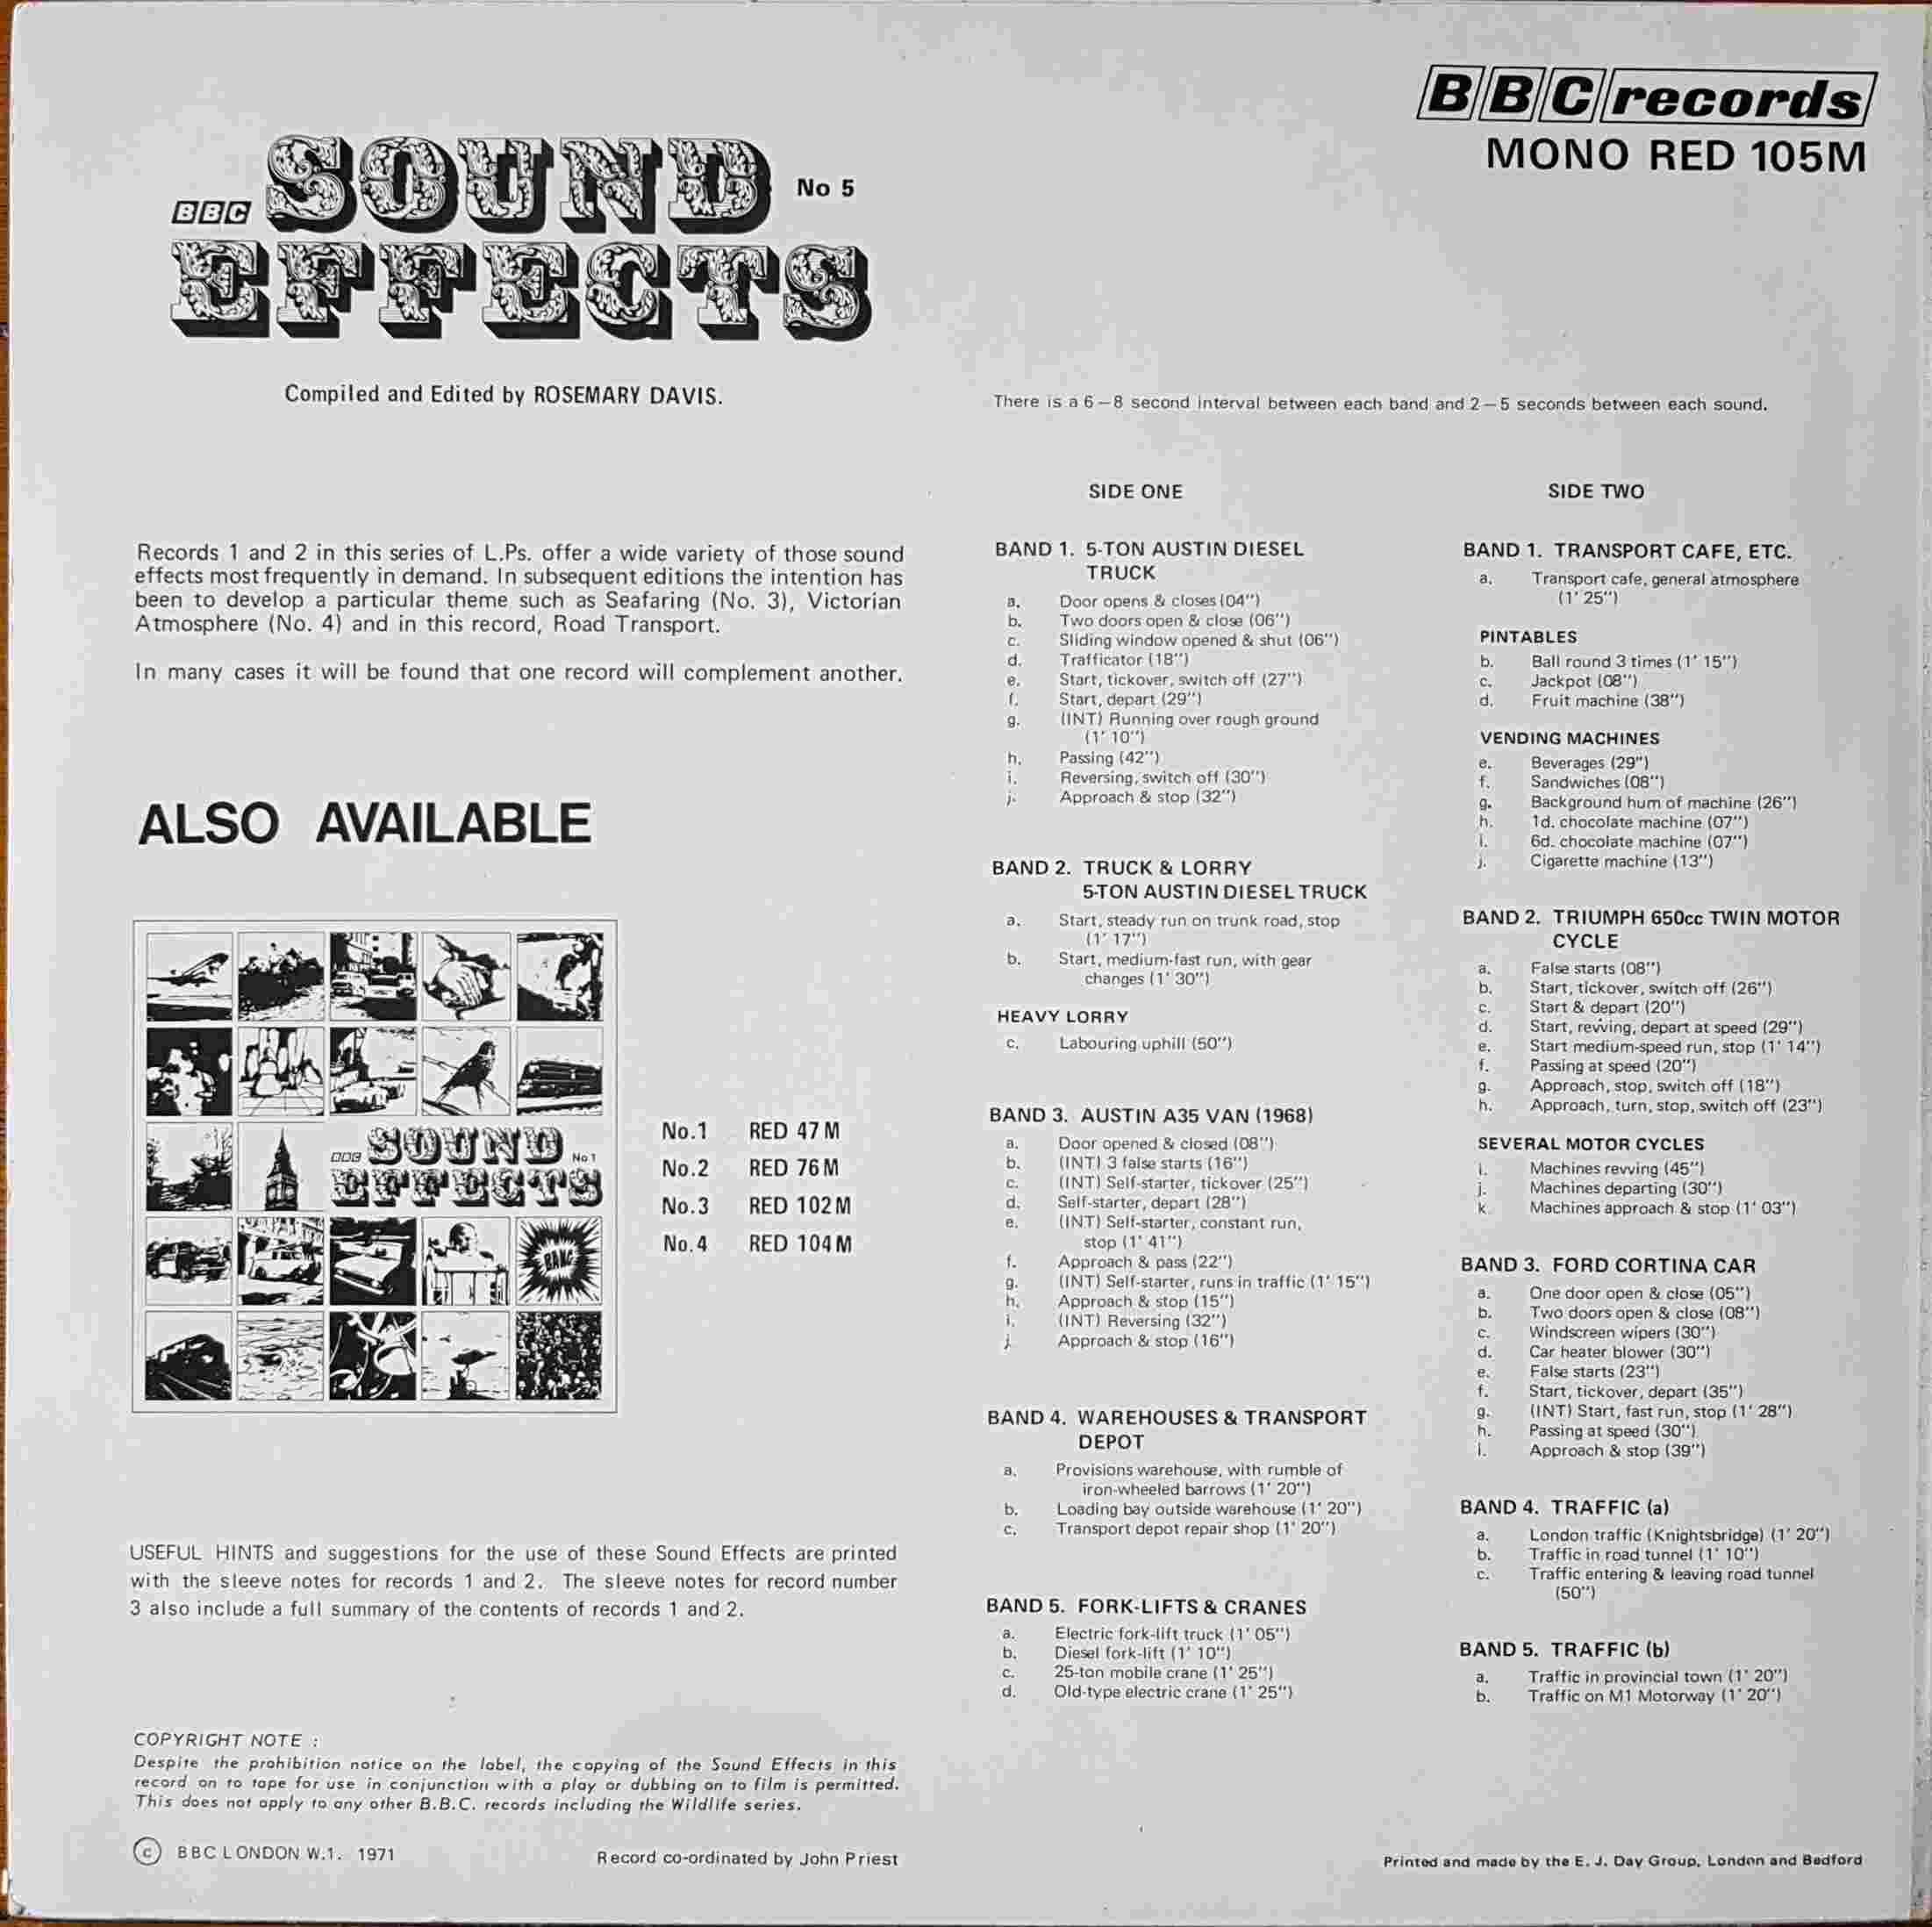 Picture of RED 105 Sound effects no. 5 by artist Various from the BBC records and Tapes library